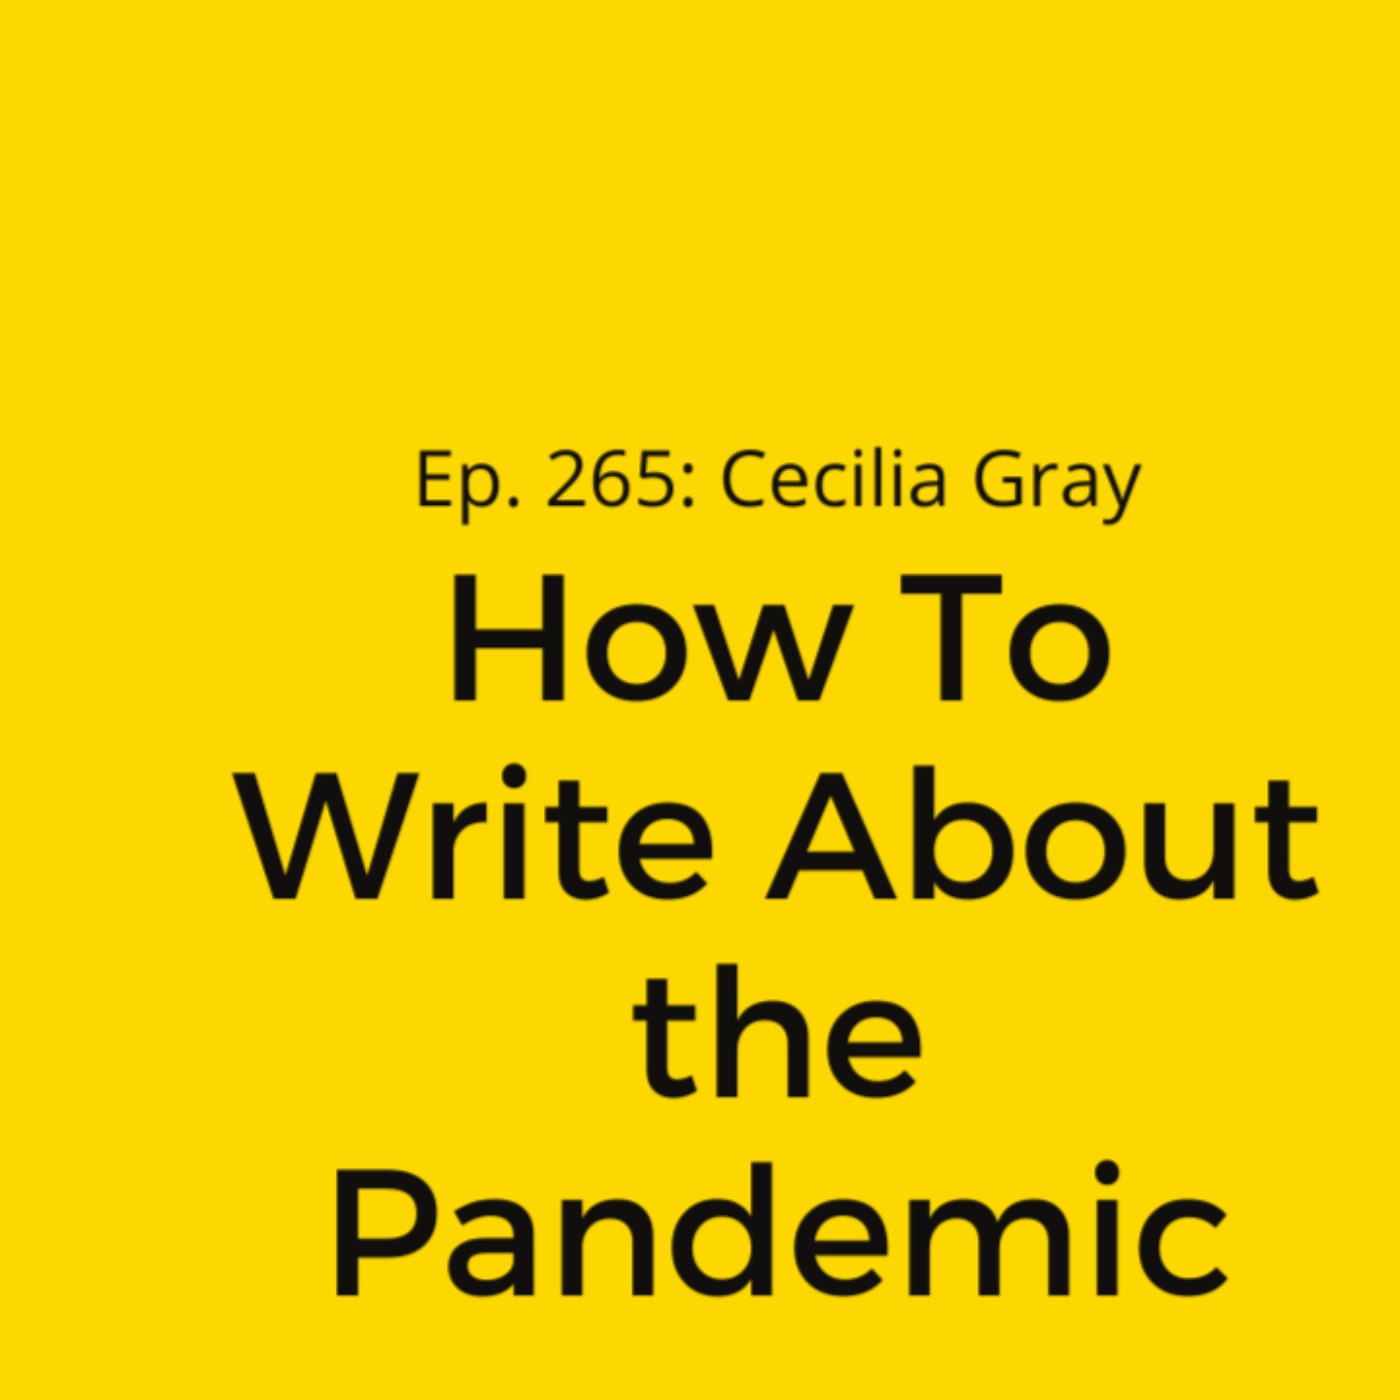 Ep. 265: Cecilia Gray on How To Write About the Pandemic